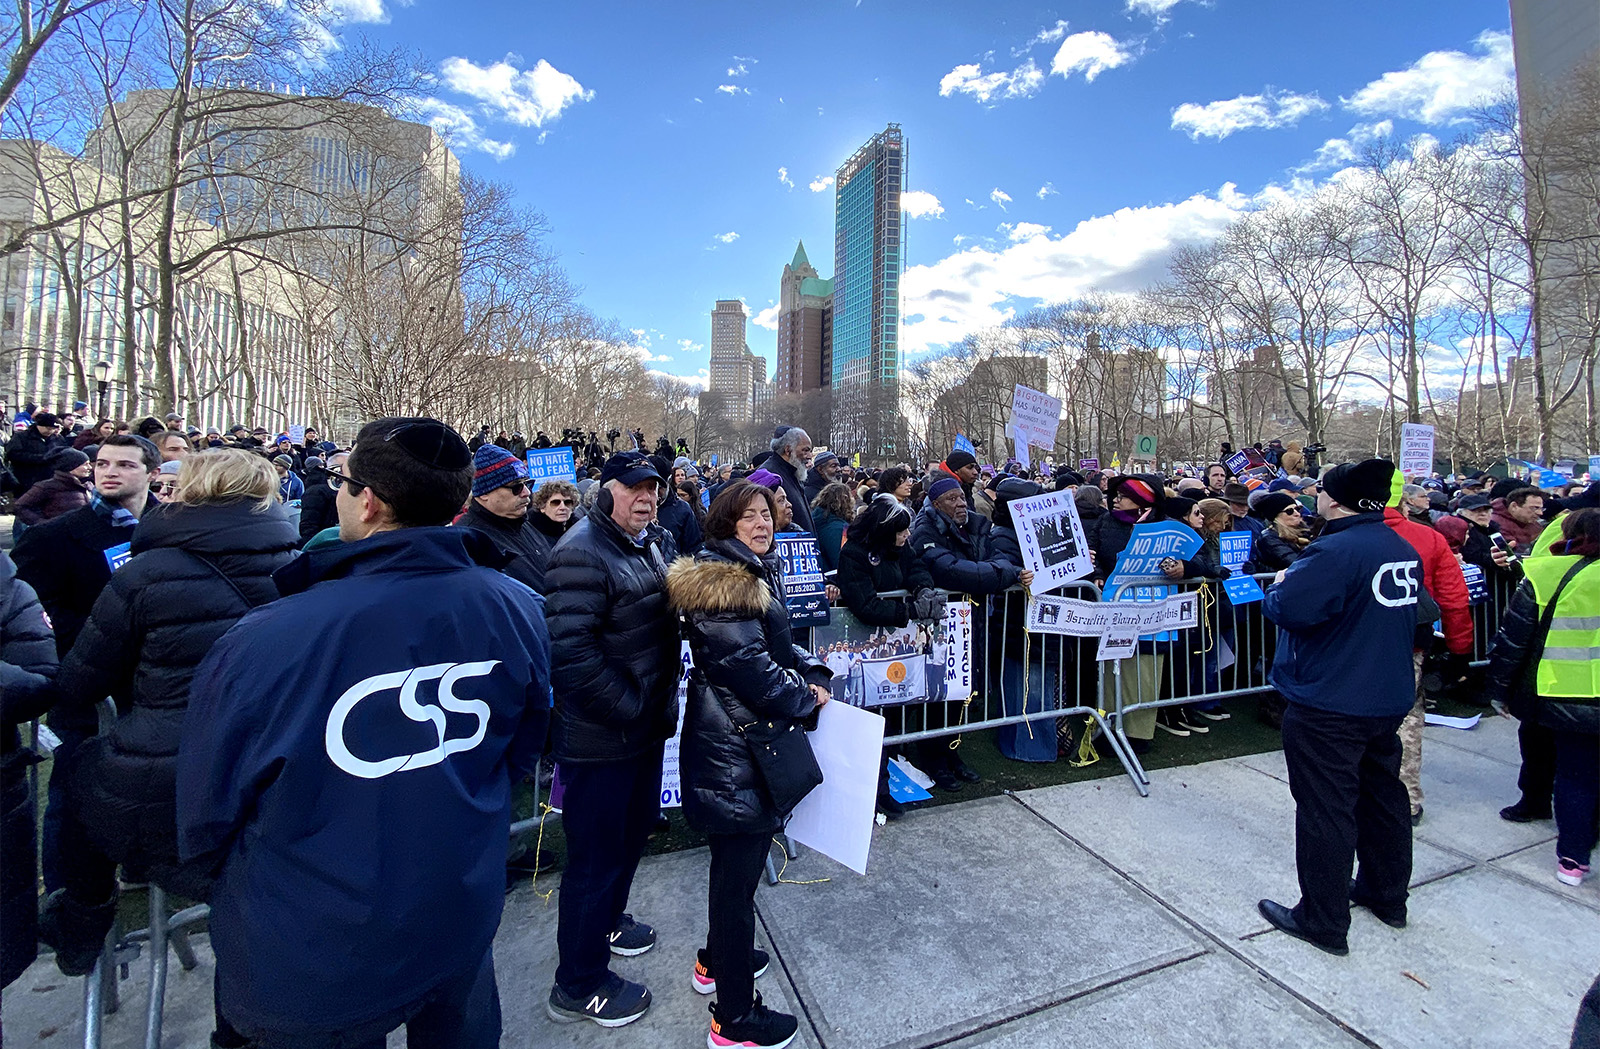 People attend the “No Hate No Fear” rally in New York in Jan. 2020. The primary organizers of the event were the JCRC of New York, CSI and the UJA-Federation of New York. The rally took place in the aftermath of attacks against Jewish communities in Jersey City, NJ, and Monsey, NY. Community Security Service volunteers provided security on the ground. Pastor Gil Monrose and the 67th Clergy Council were also in attendance, which served as a seminal moment where all three organizations marched over the Brooklyn Bridge, leading to the establishment of the Interfaith Security Council. Photo courtesy of CSS